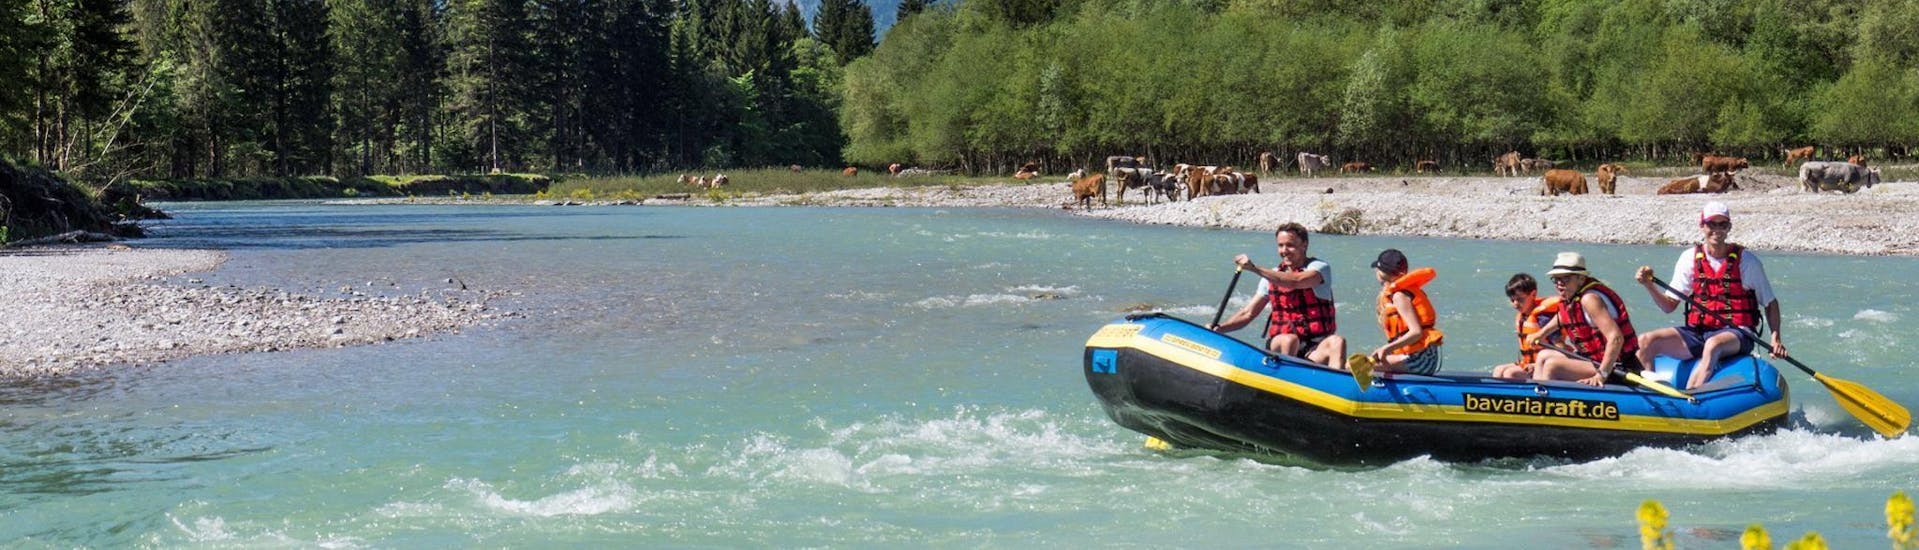 A family is rafting through the spectacular Bavarian landscape during the Soft Rafting for Groups (4+ ppl.) on the Loisach with Bavariaraft